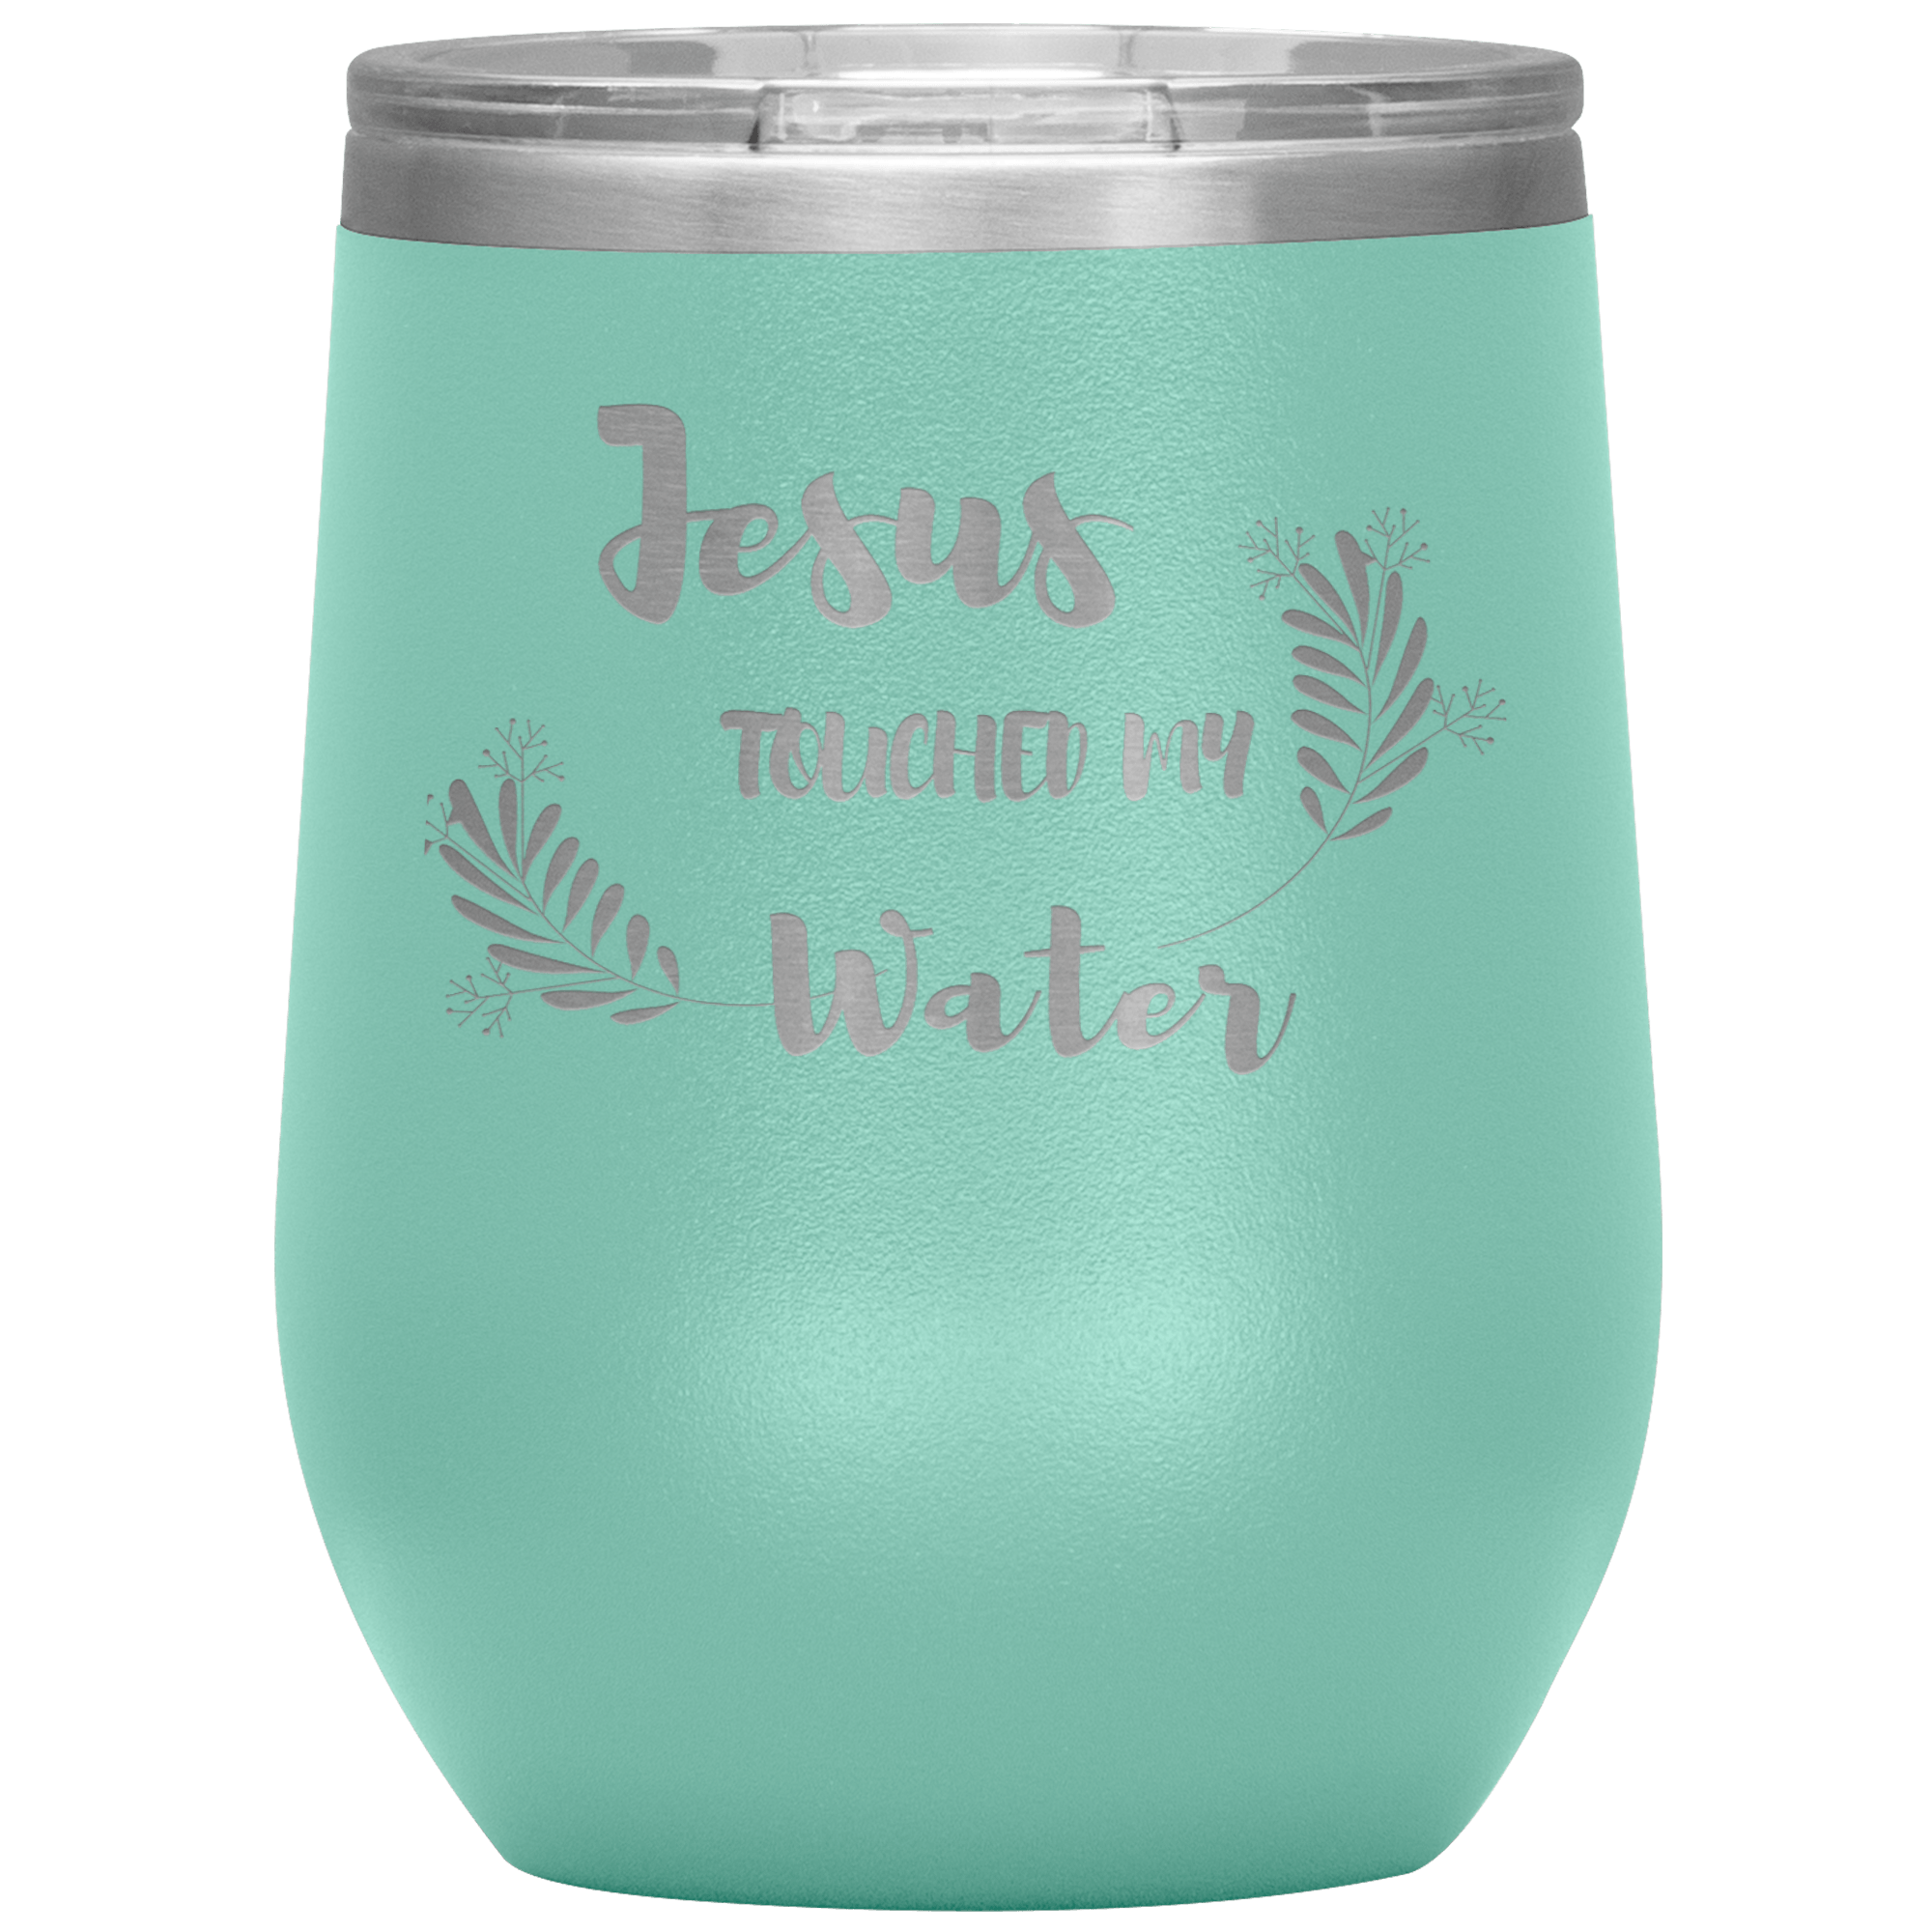 "JESUS TOUCHED MY WATER"Tumbler